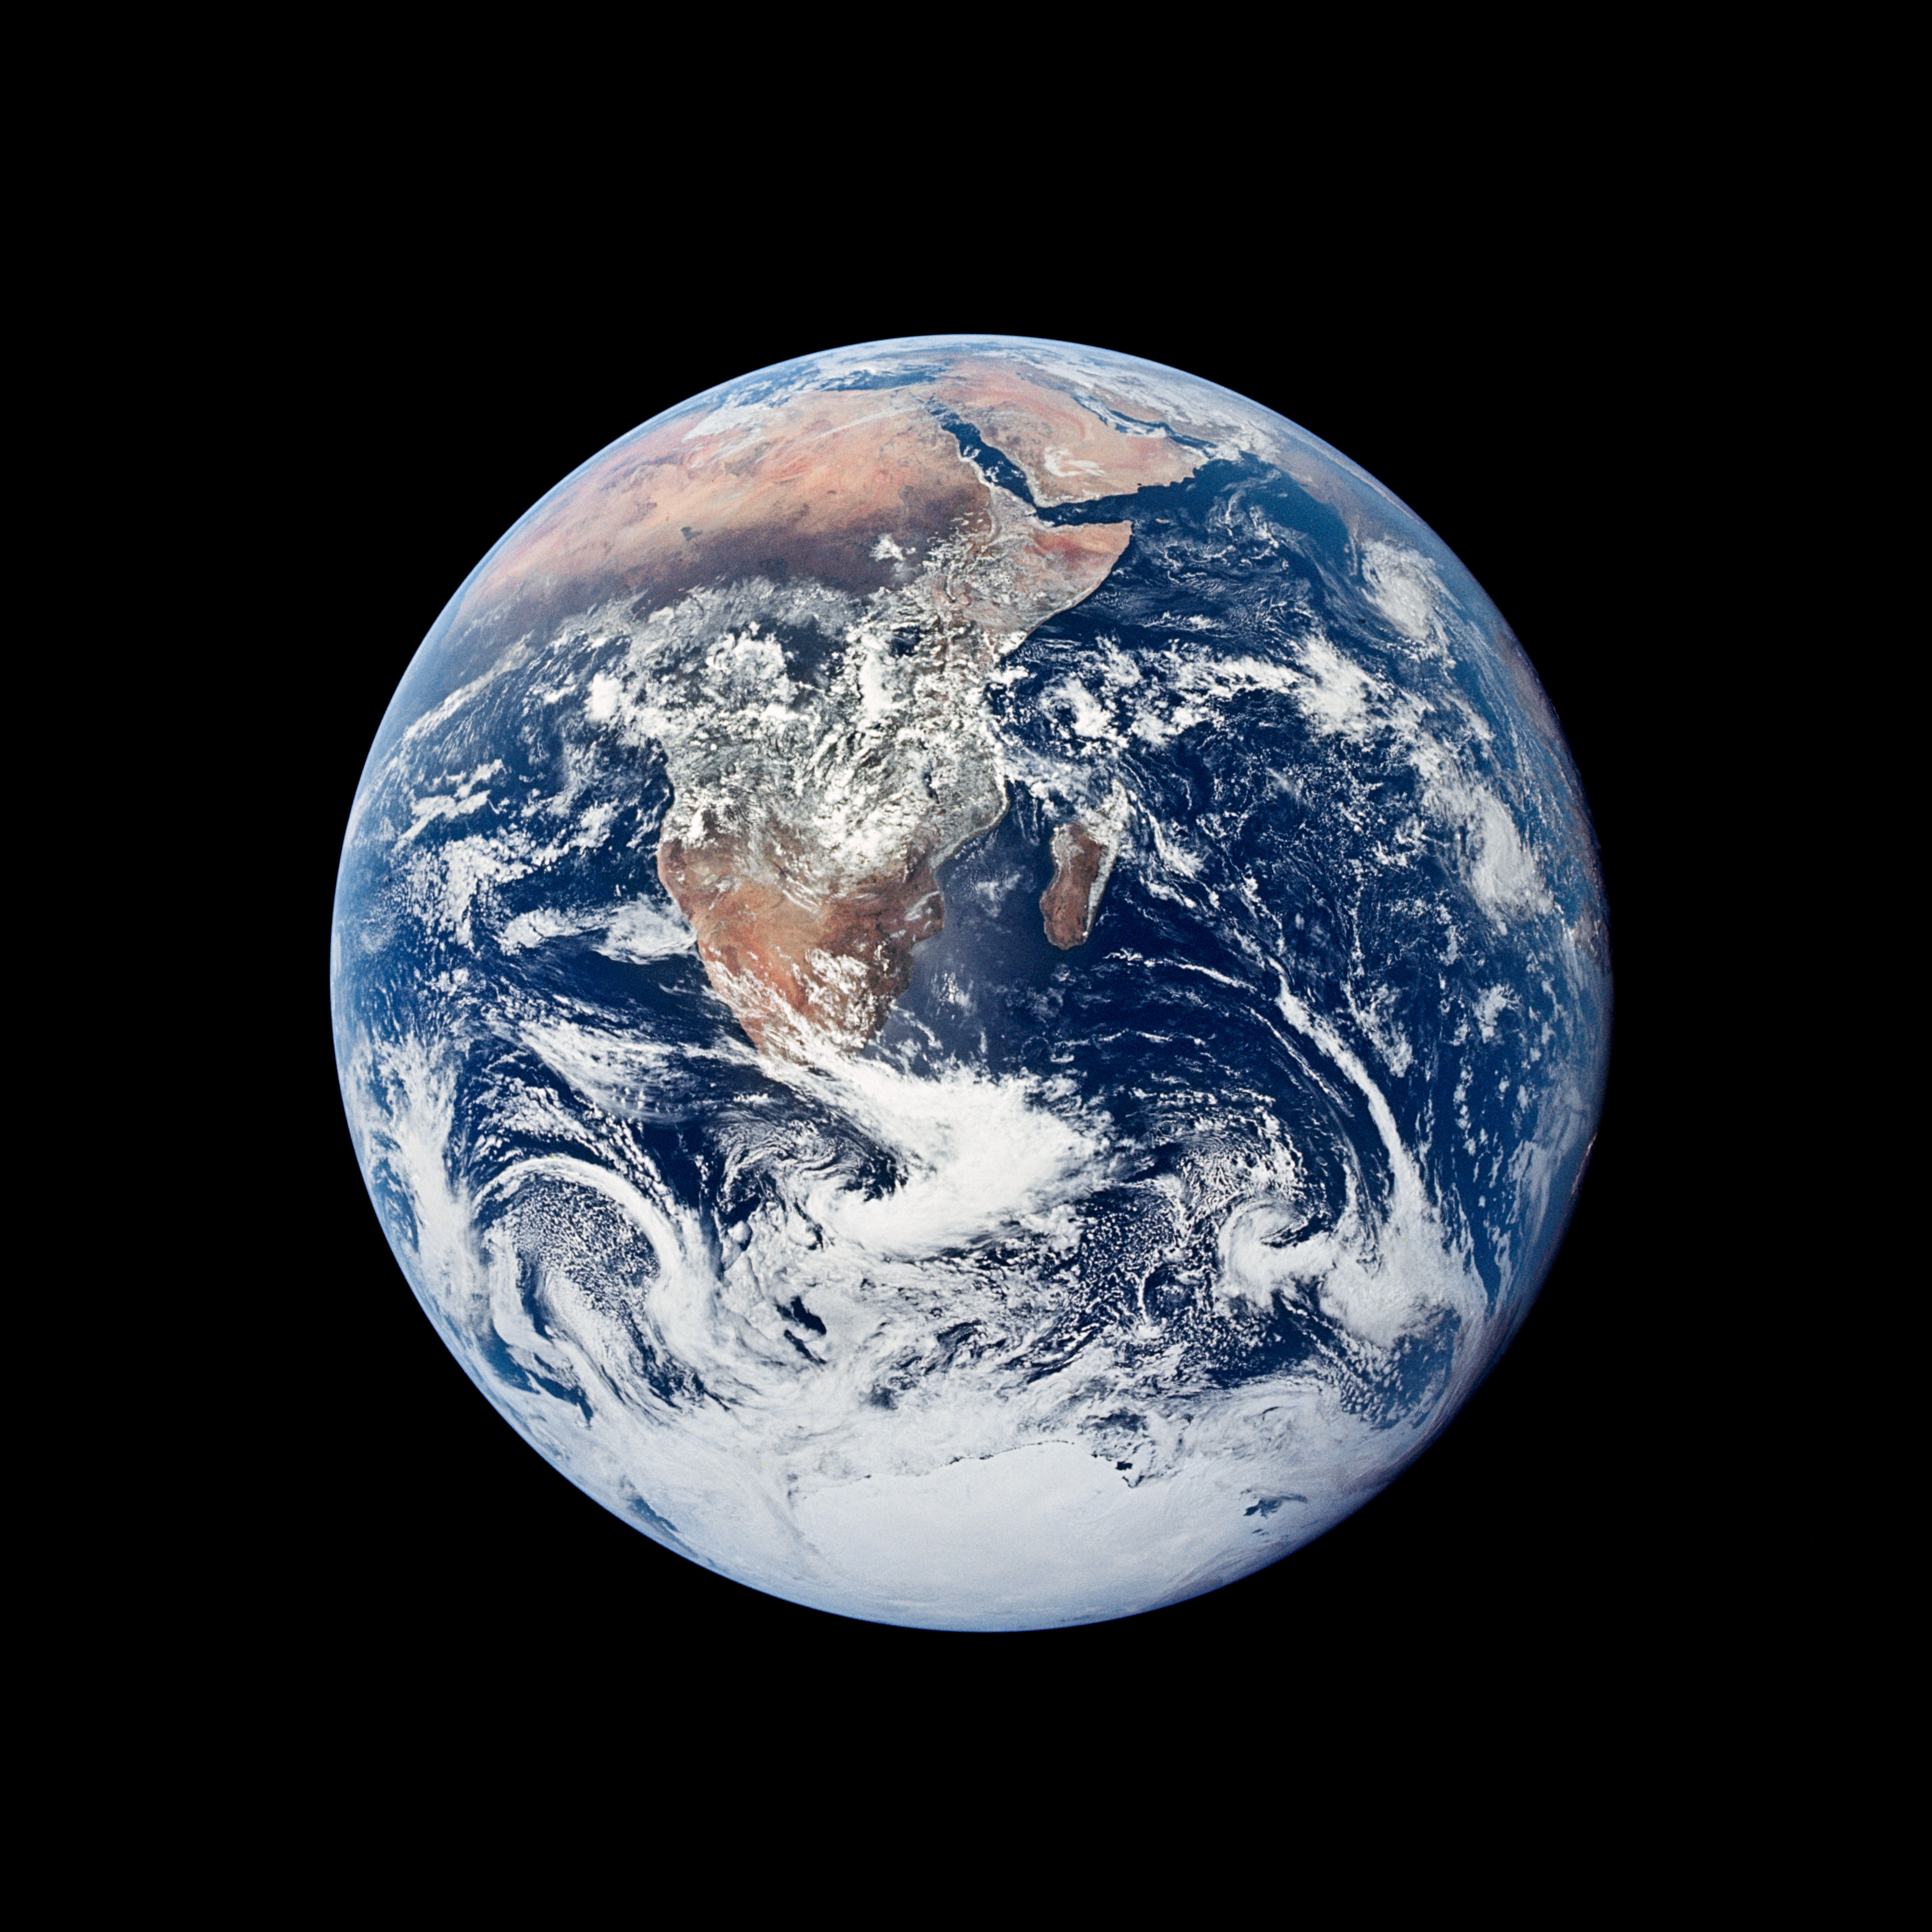 The famous Blue Marble image taken by Apollo 17 astronauts on their way to the Moon in 1972